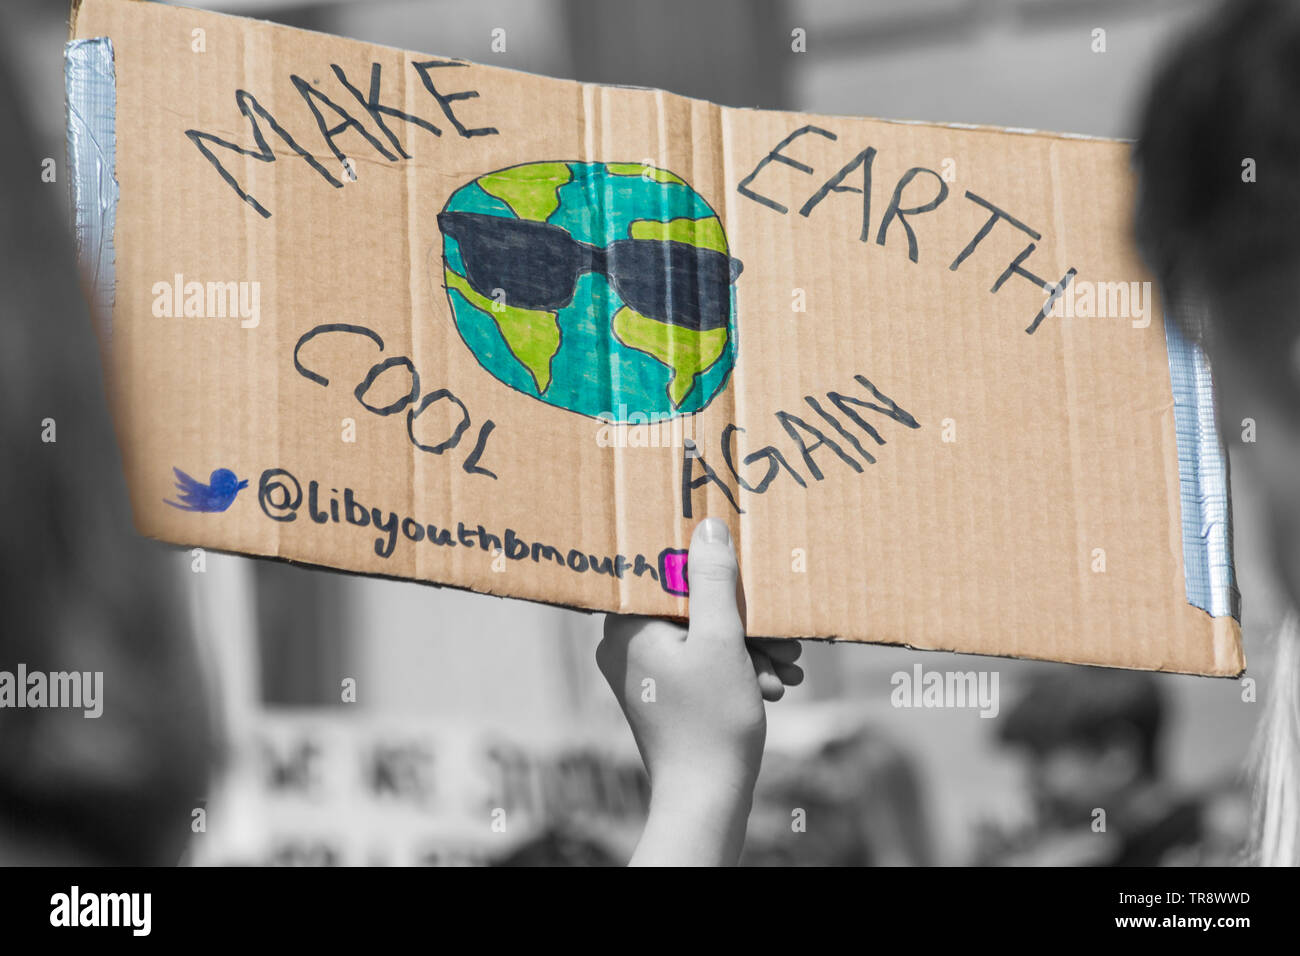 Make earth cool again sign being held at Youth Strike 4 Climate at Bournemouth, Dorset UK in May Stock Photo